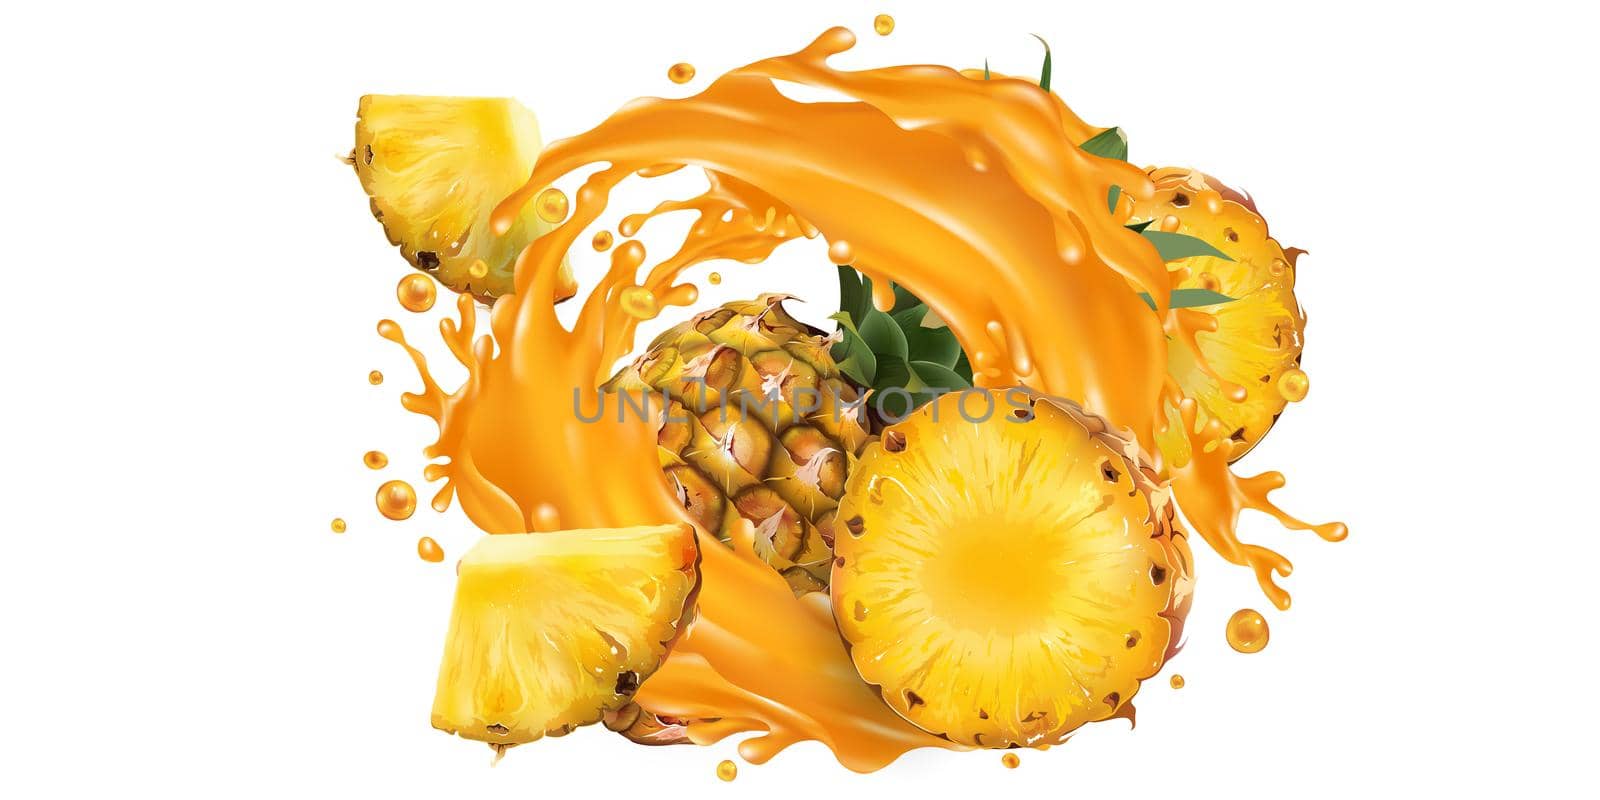 Fresh pineapple and a splash of fruit juice on a white background. Realistic style illustration.